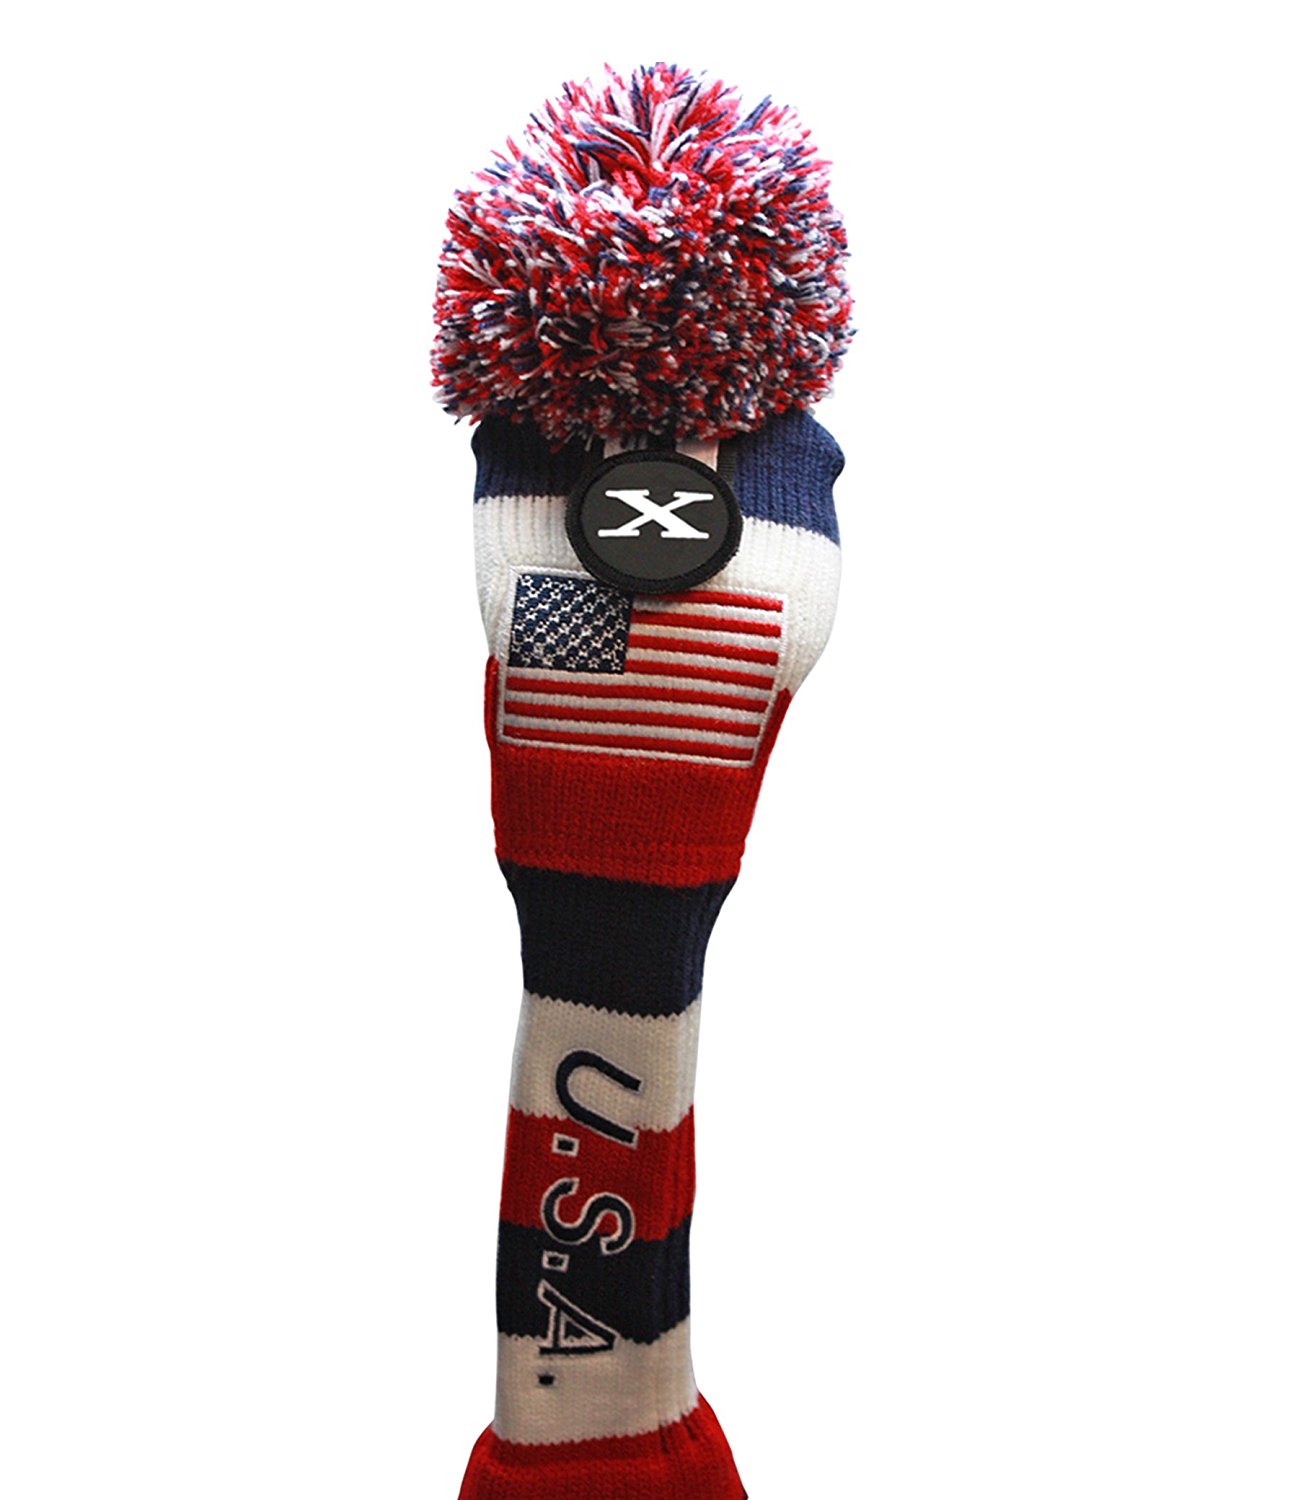 USA Majek Golf 3 5 X Fairway Woods Headcovers Pom Pom Knit Limited Edition Vintage Classic Traditional Flag Stars Red White Blue Stripes Retro Head Cover Fits 260cc Woods - image 4 of 7